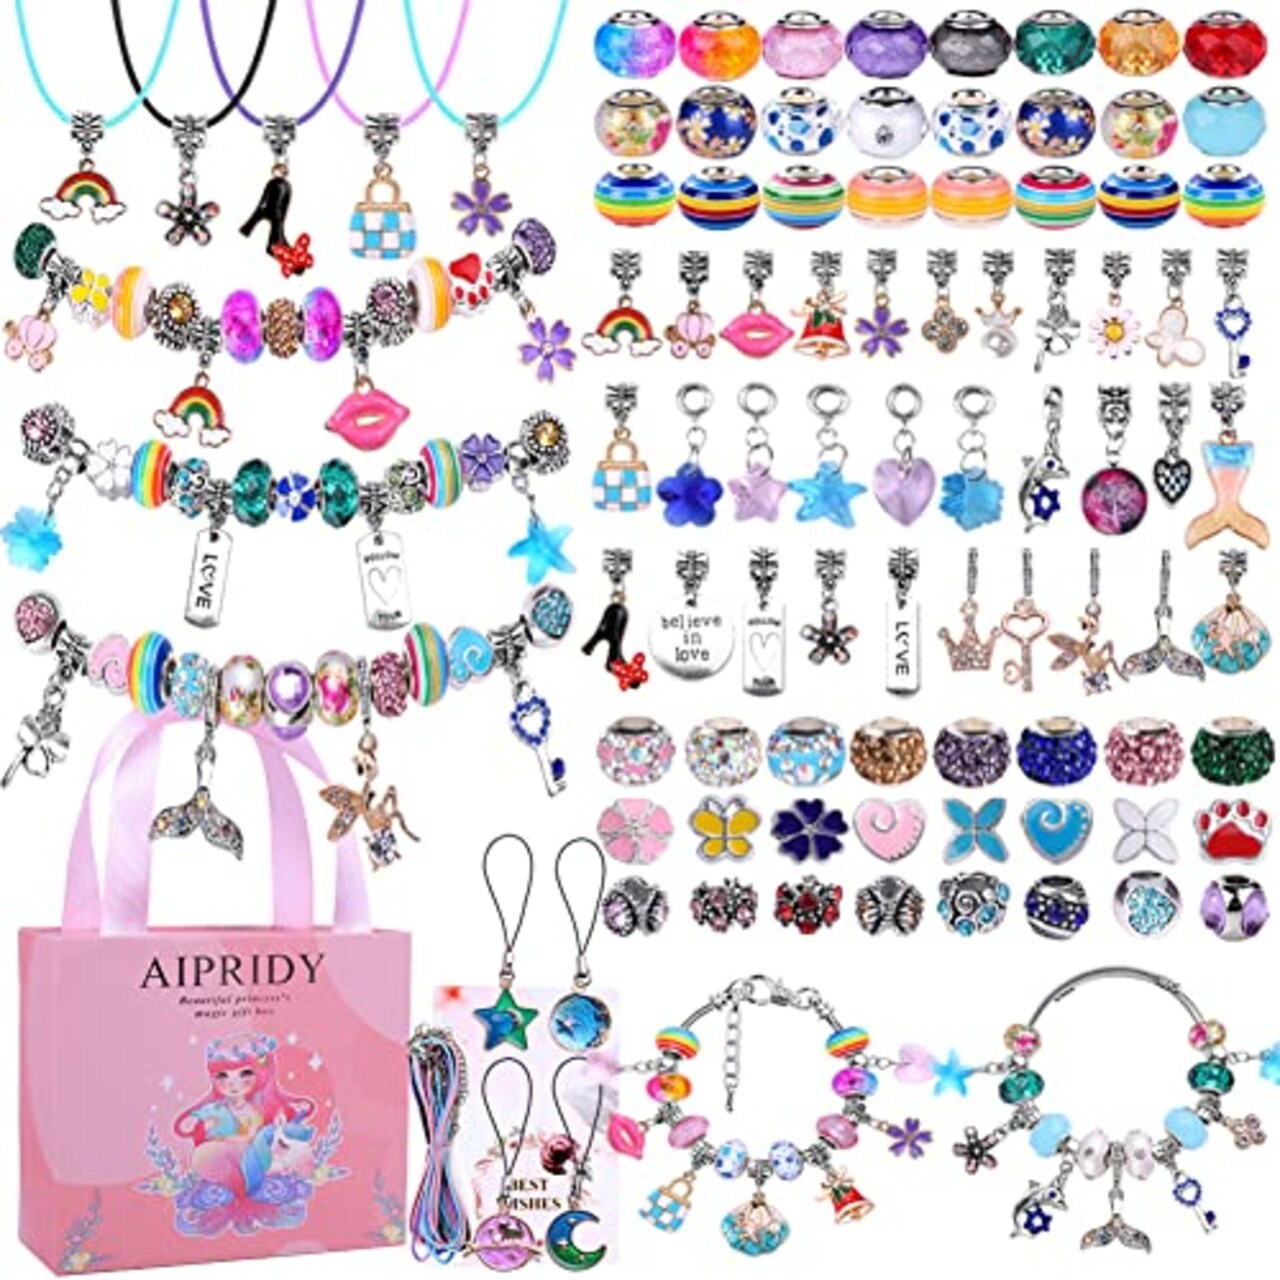 AIPRIDY Charm Bracelet Making Kit,DIY Craft for Girls, Unicorn Mermaid  Crafts Gifts Set for Arts and Crafts for Girls Teens Ages 6-12 (104 Pieces)